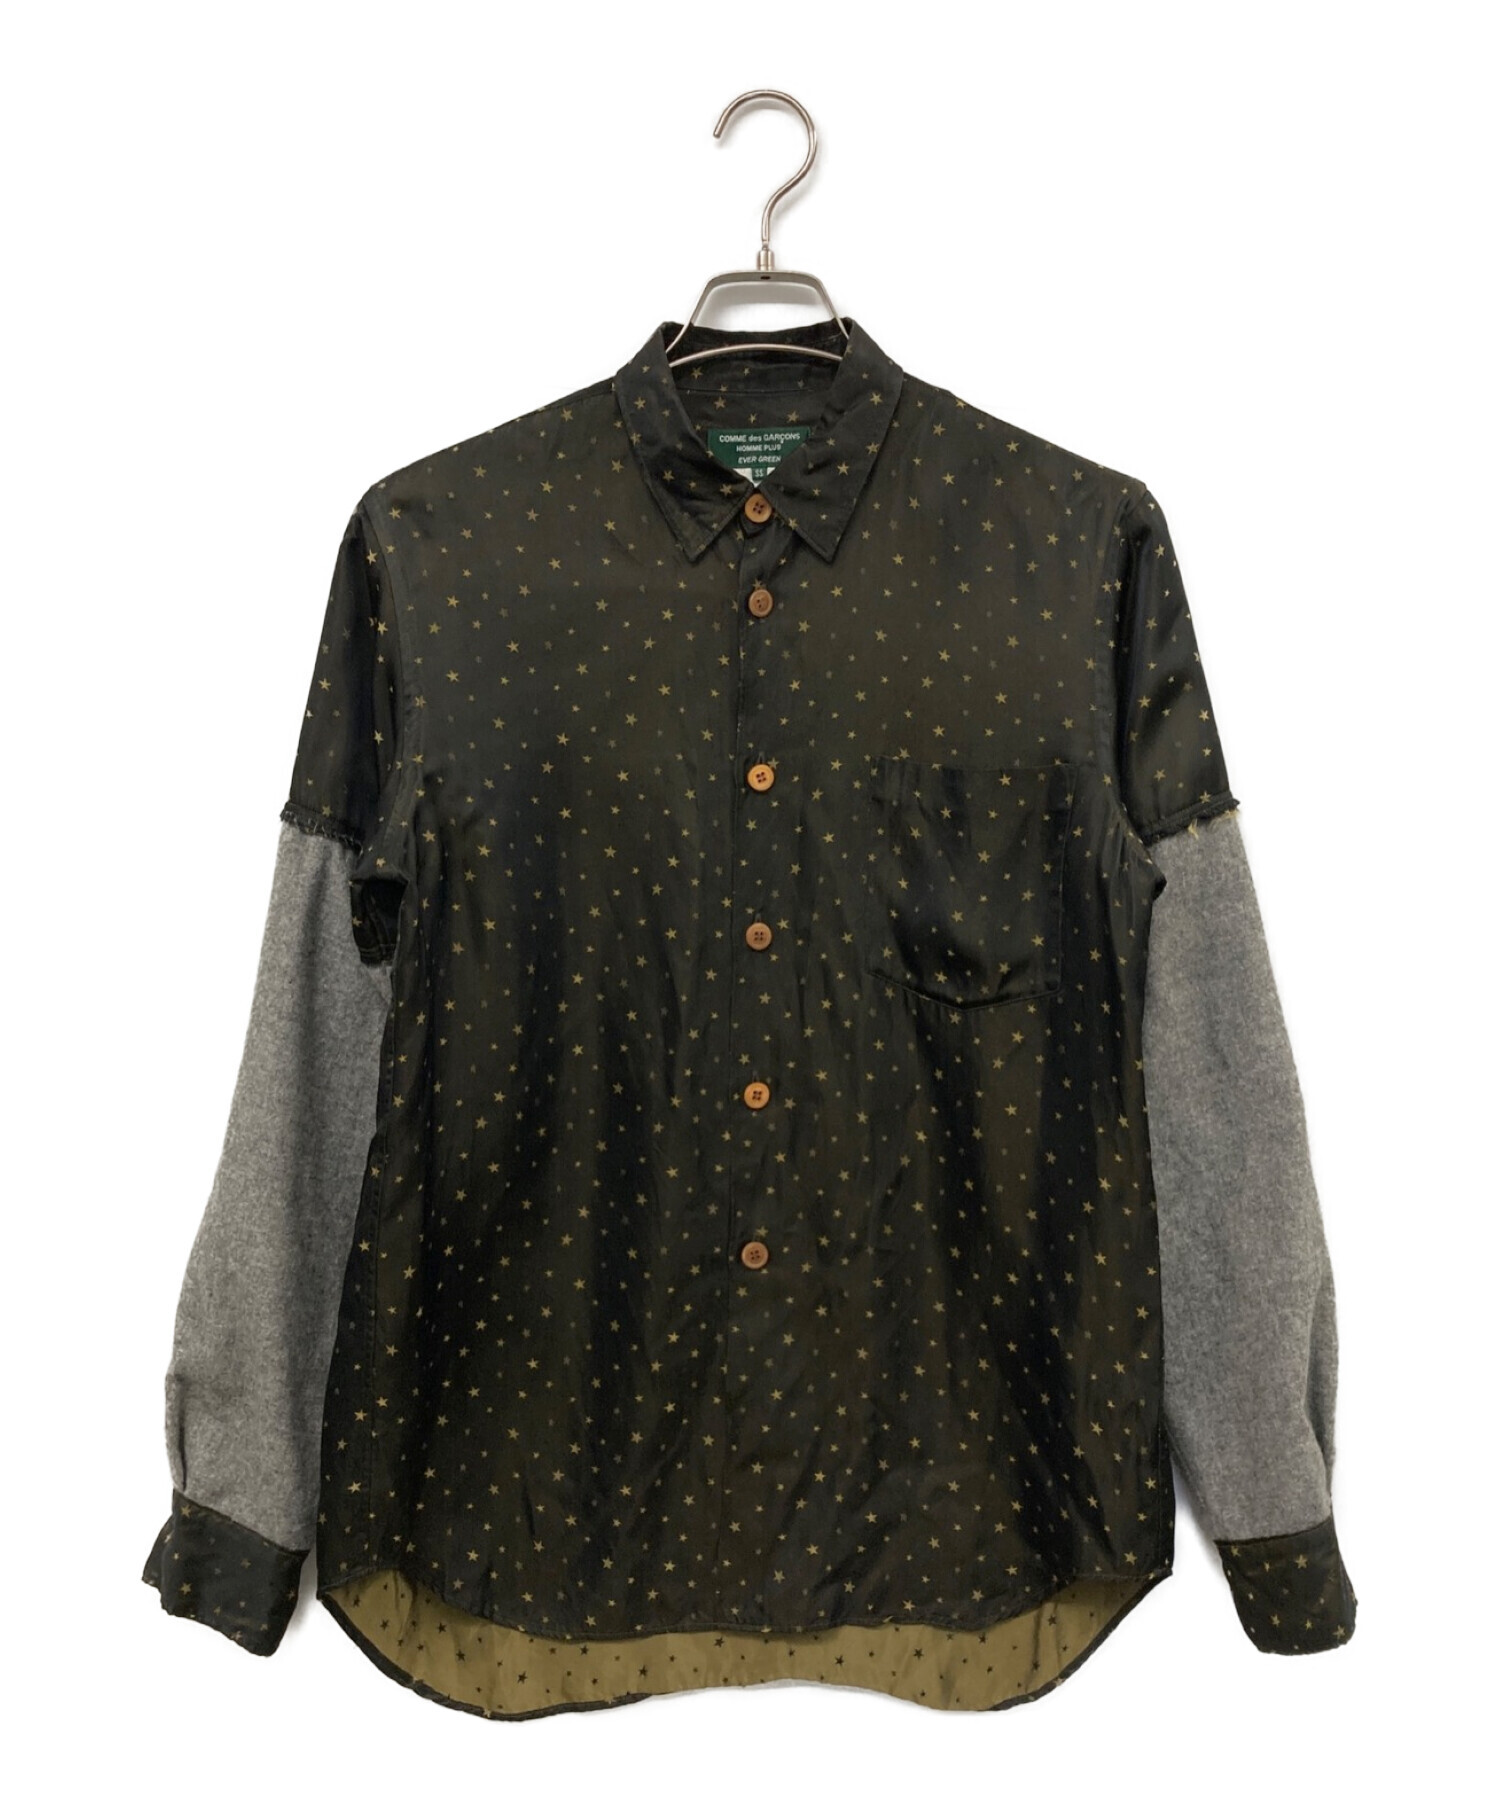 COMME des GARCONS EVER GREEN シャツ XS - シャツ